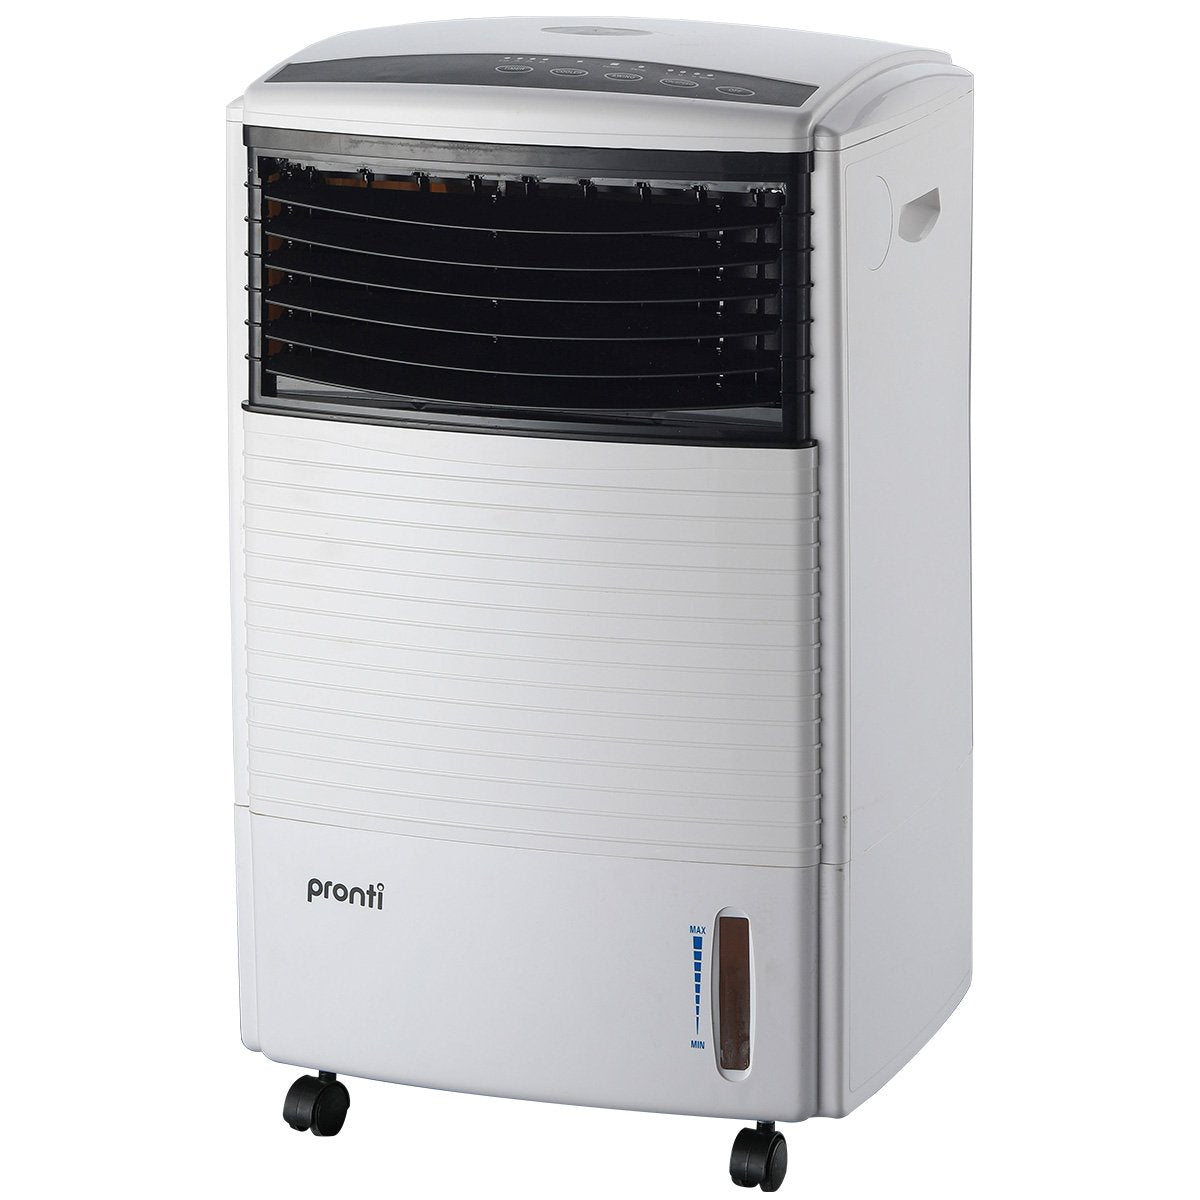 Pronti 10L Evaporative Cooler Air Humidifier Conditioner - SILBERSHELL